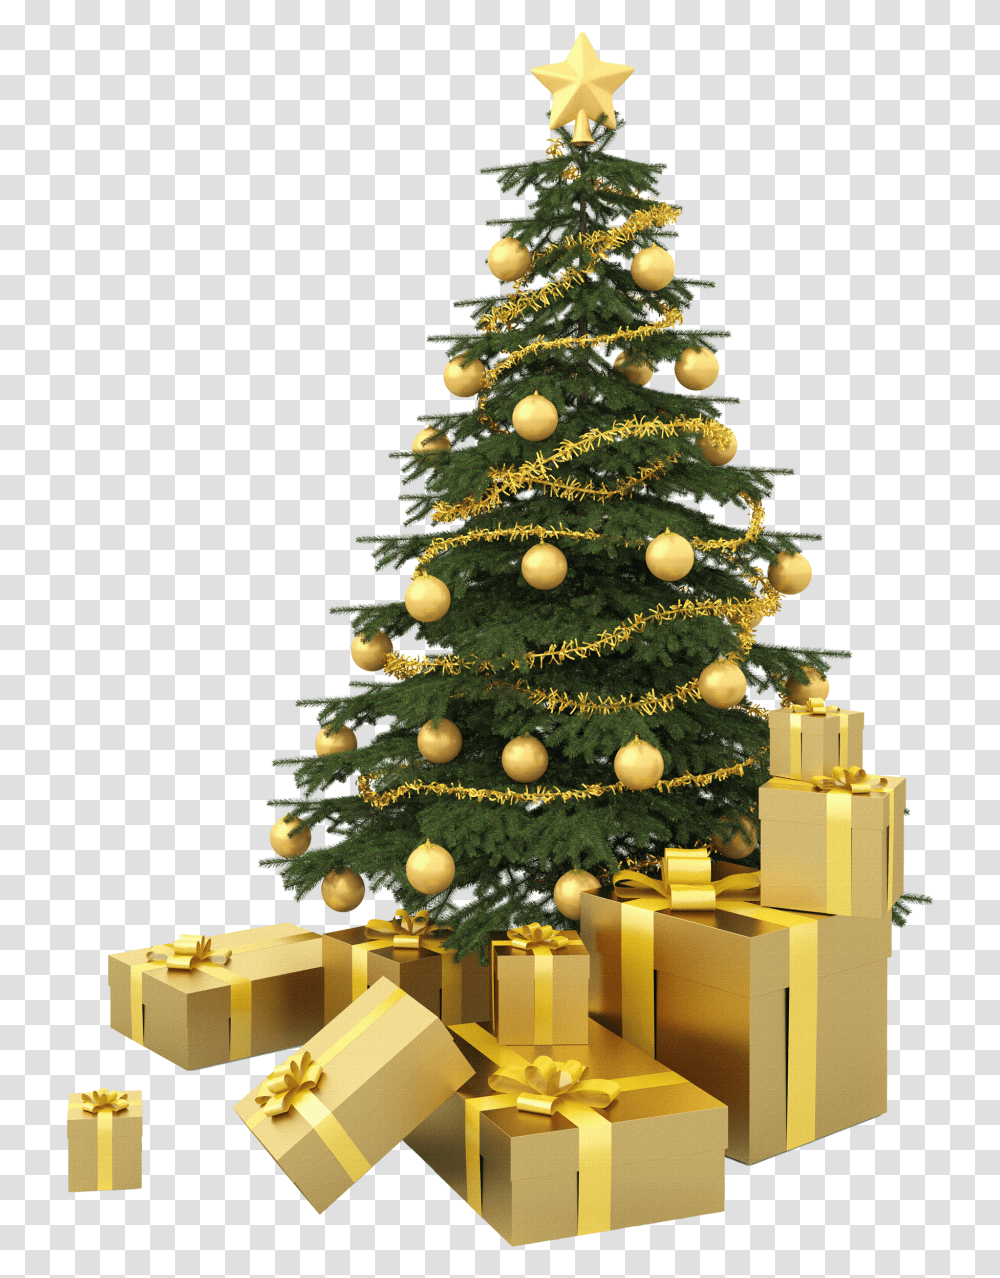 Chirstmas Tree With Presents Image New Year Tree, Plant, Christmas Tree Transparent Png